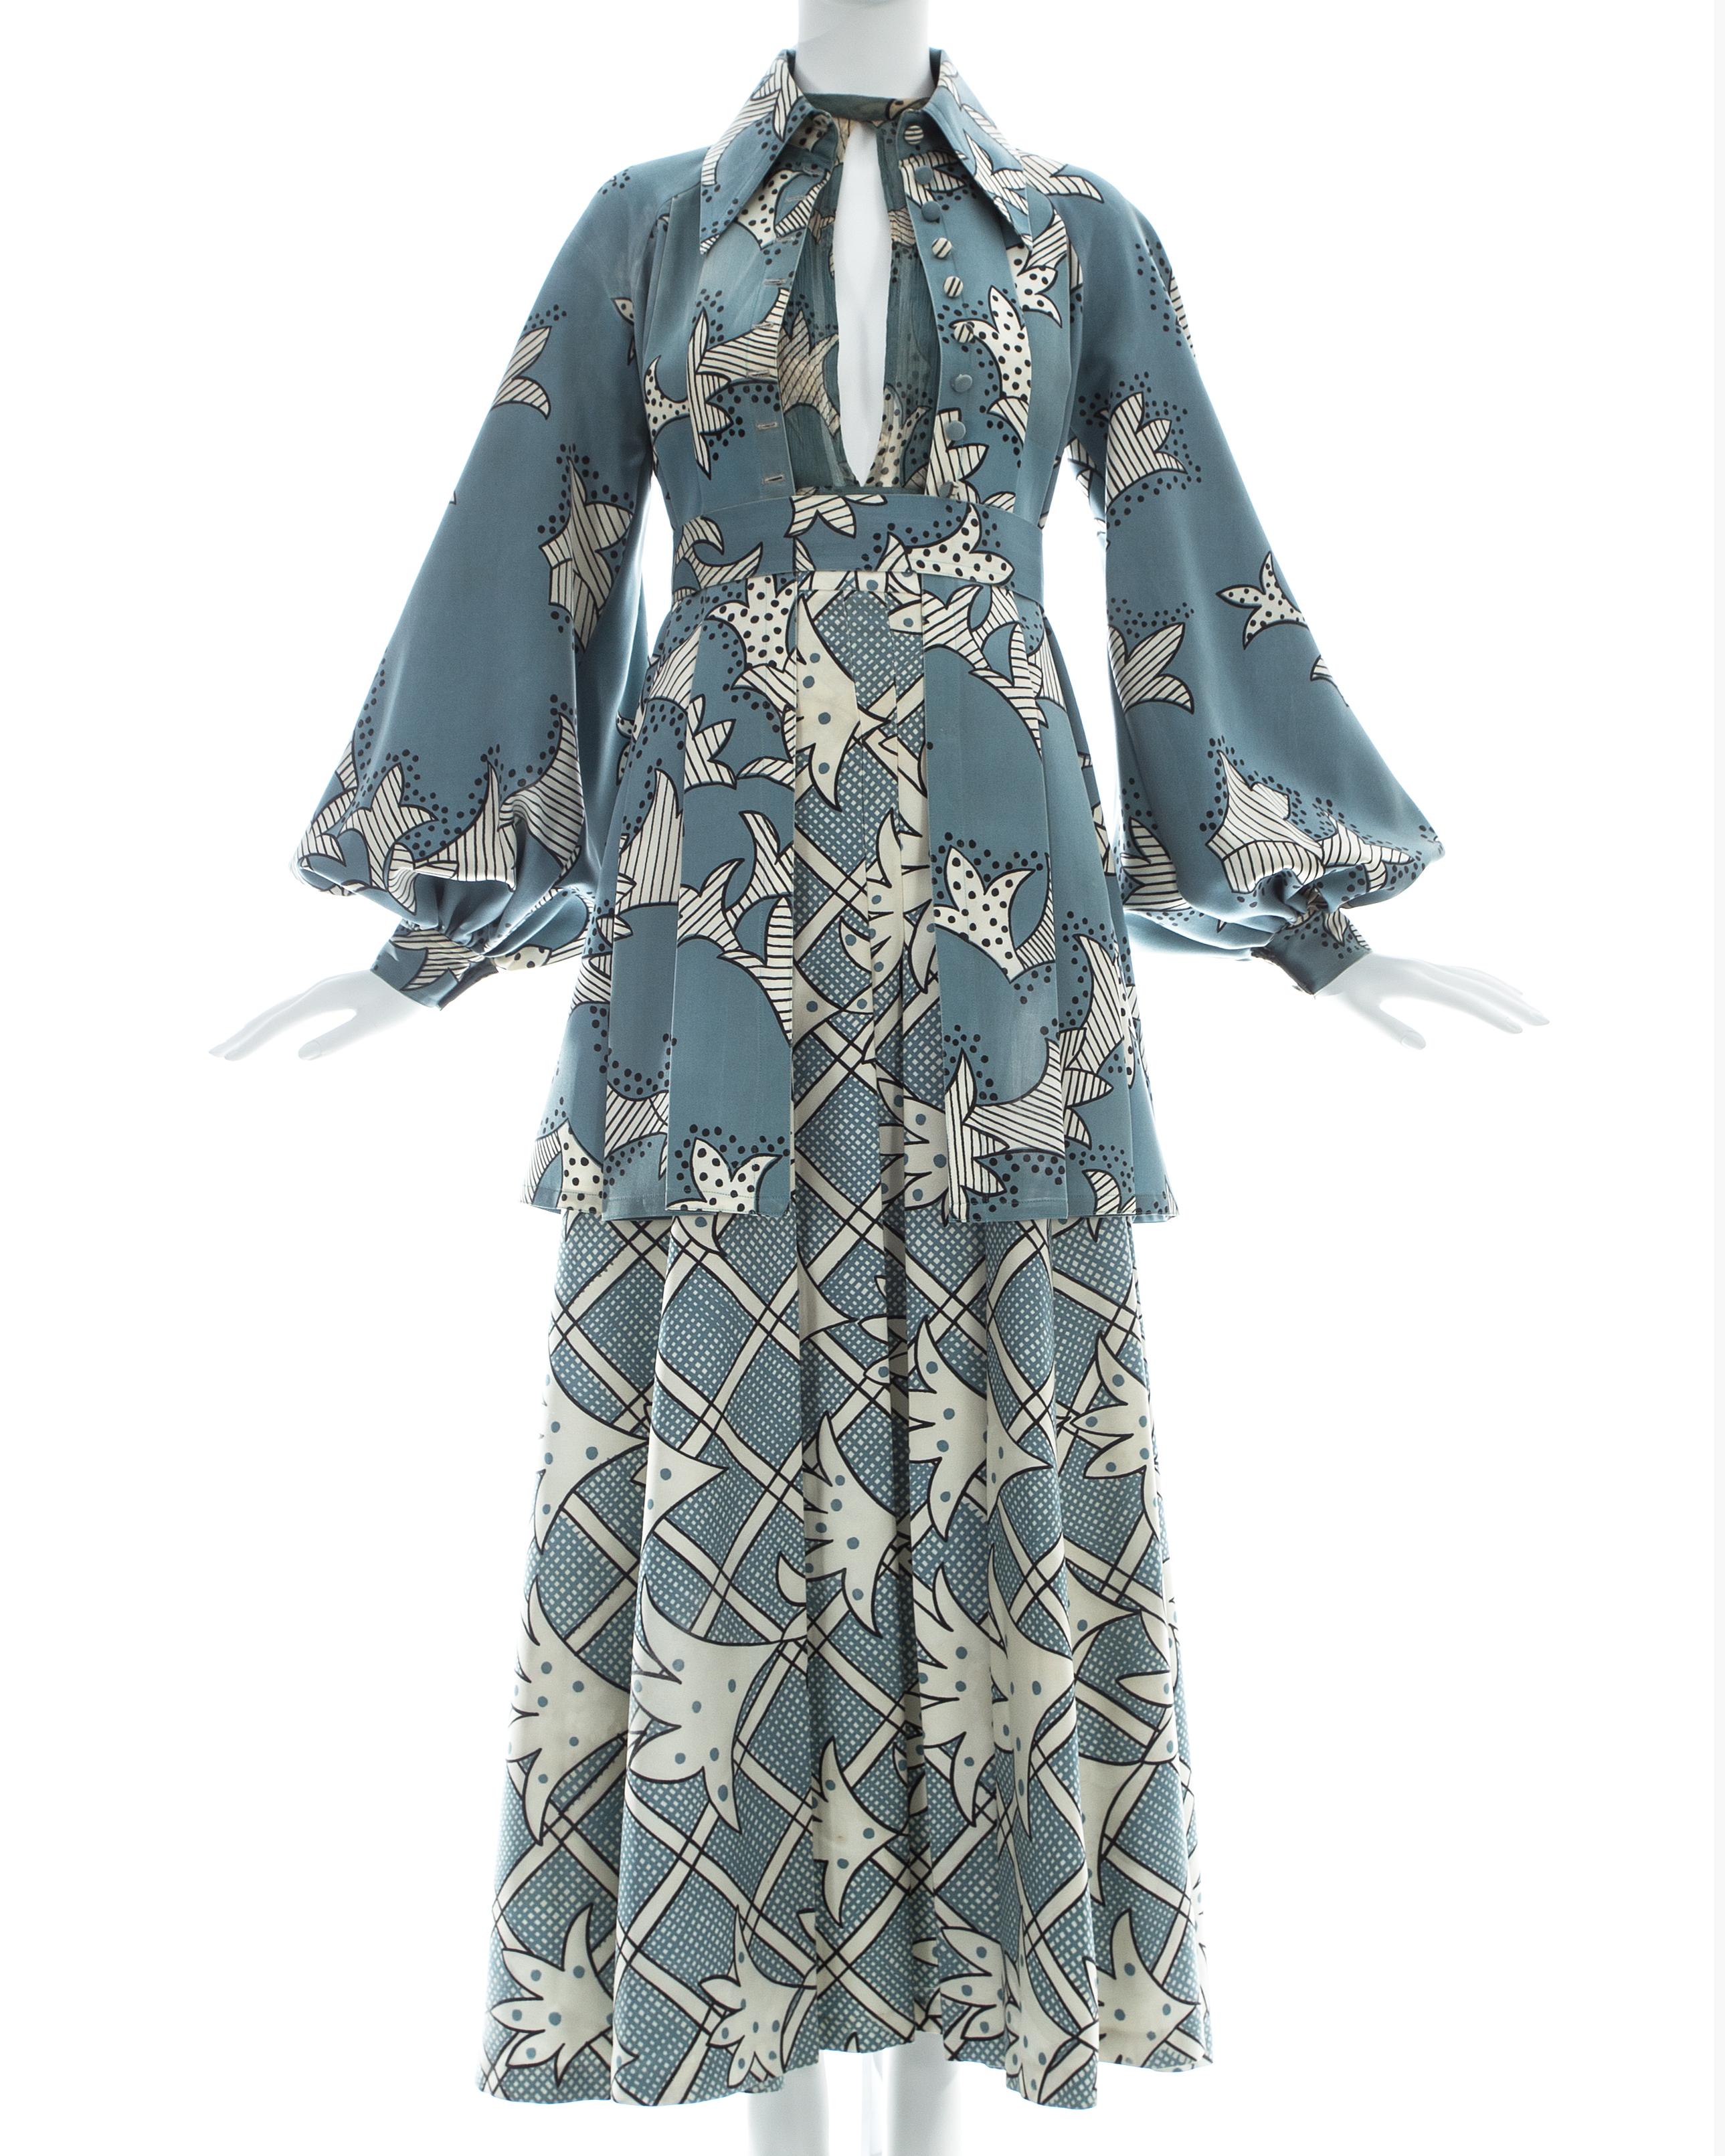 - High waisted full skirt 
- Chiffon pleated blouse with open back 
- Swing coat with fabric button closures and billowing bishop sleeves 
- Print by Celia Birtwell 

c. 1969 